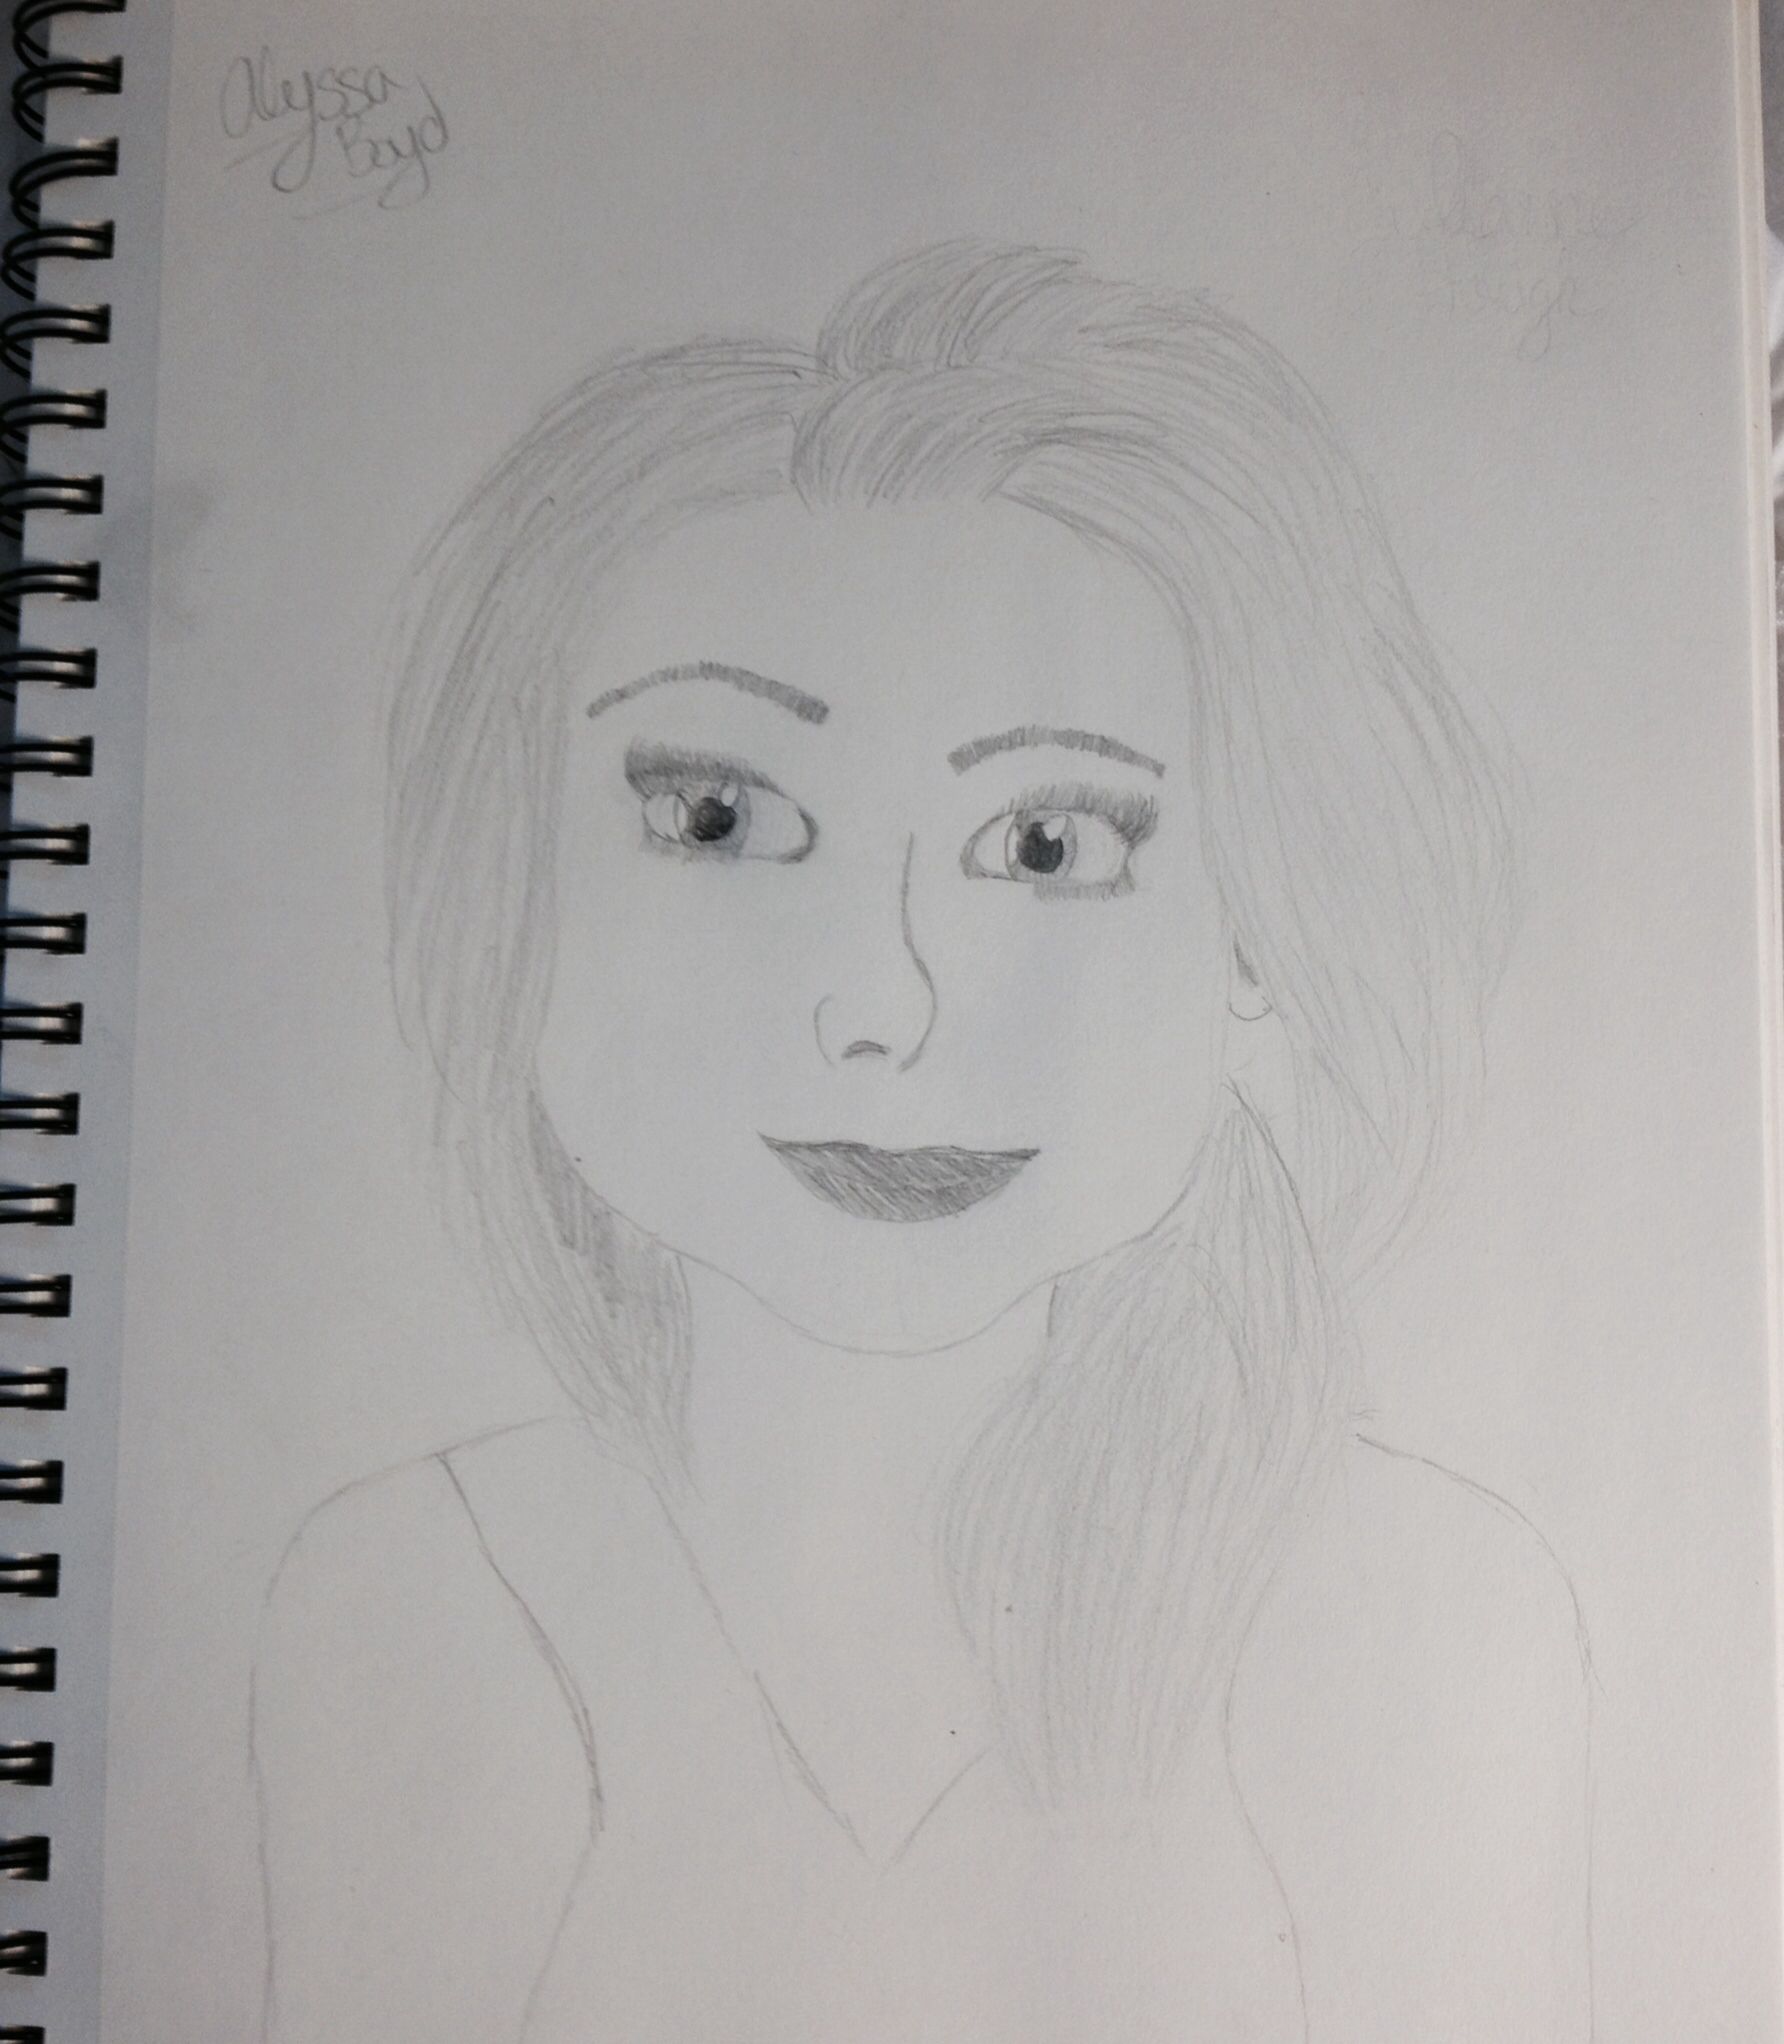 Julianne Hough Drawing Pic